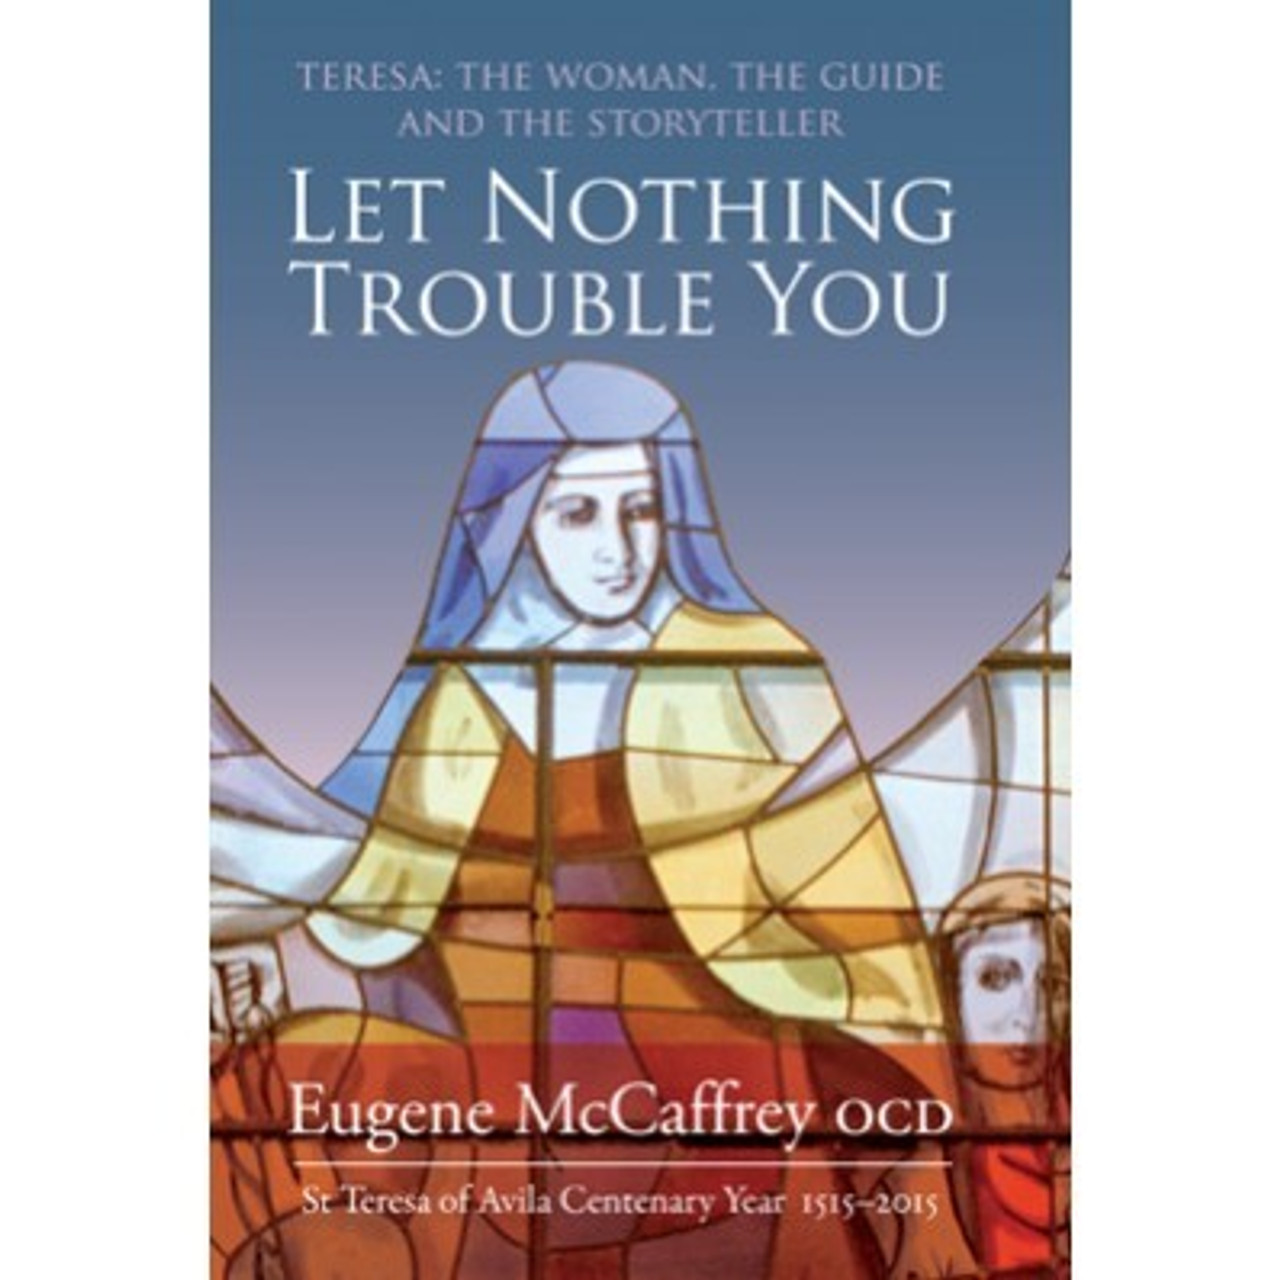 Eugene McCaffrey / Let Nothing Trouble You : Teresa : The Woman, The Guide and the Storyteller (Hardback)